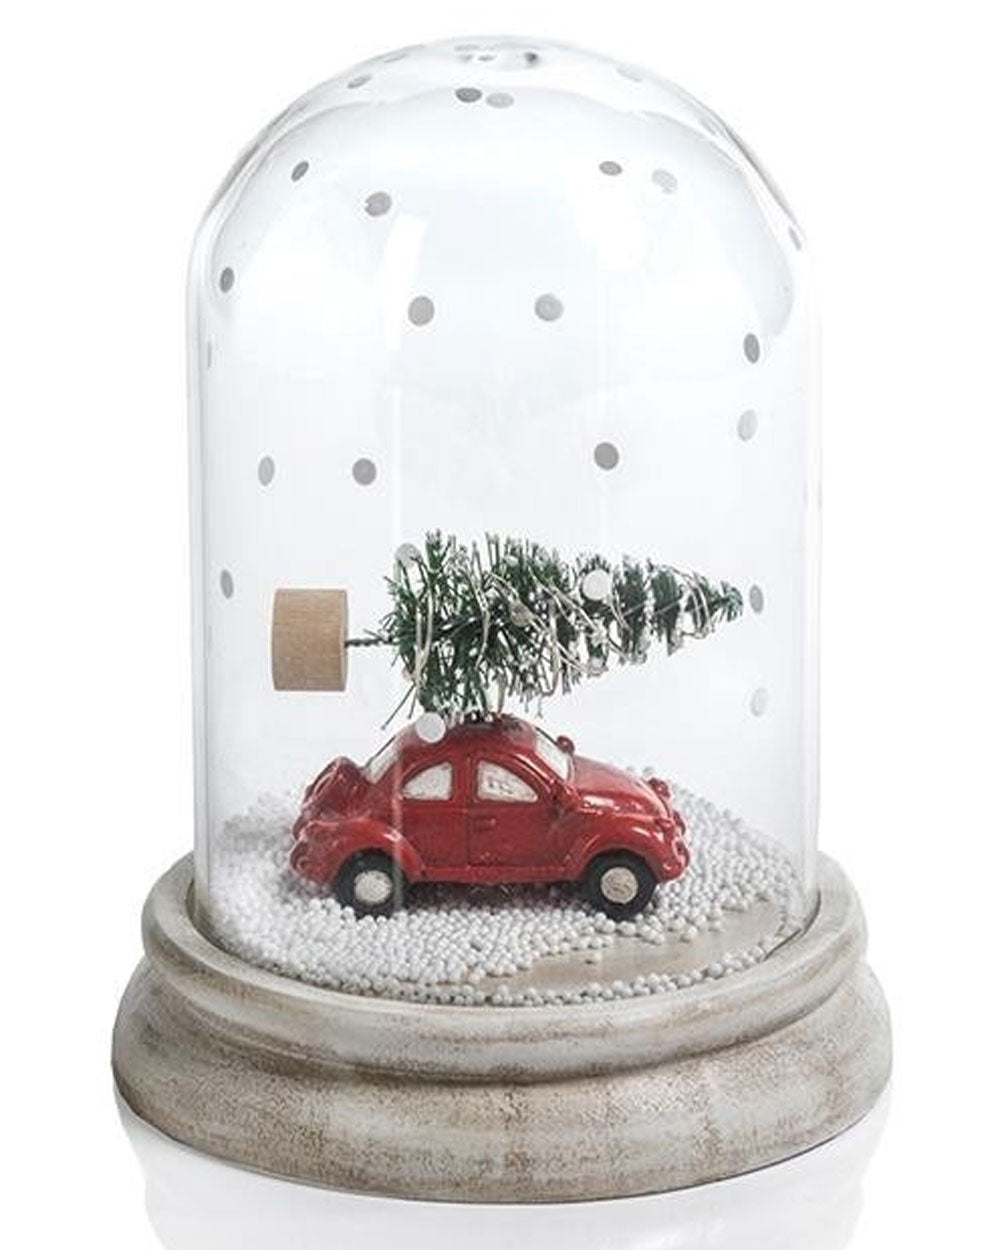 Led Snow Globe with Red Car and Tree